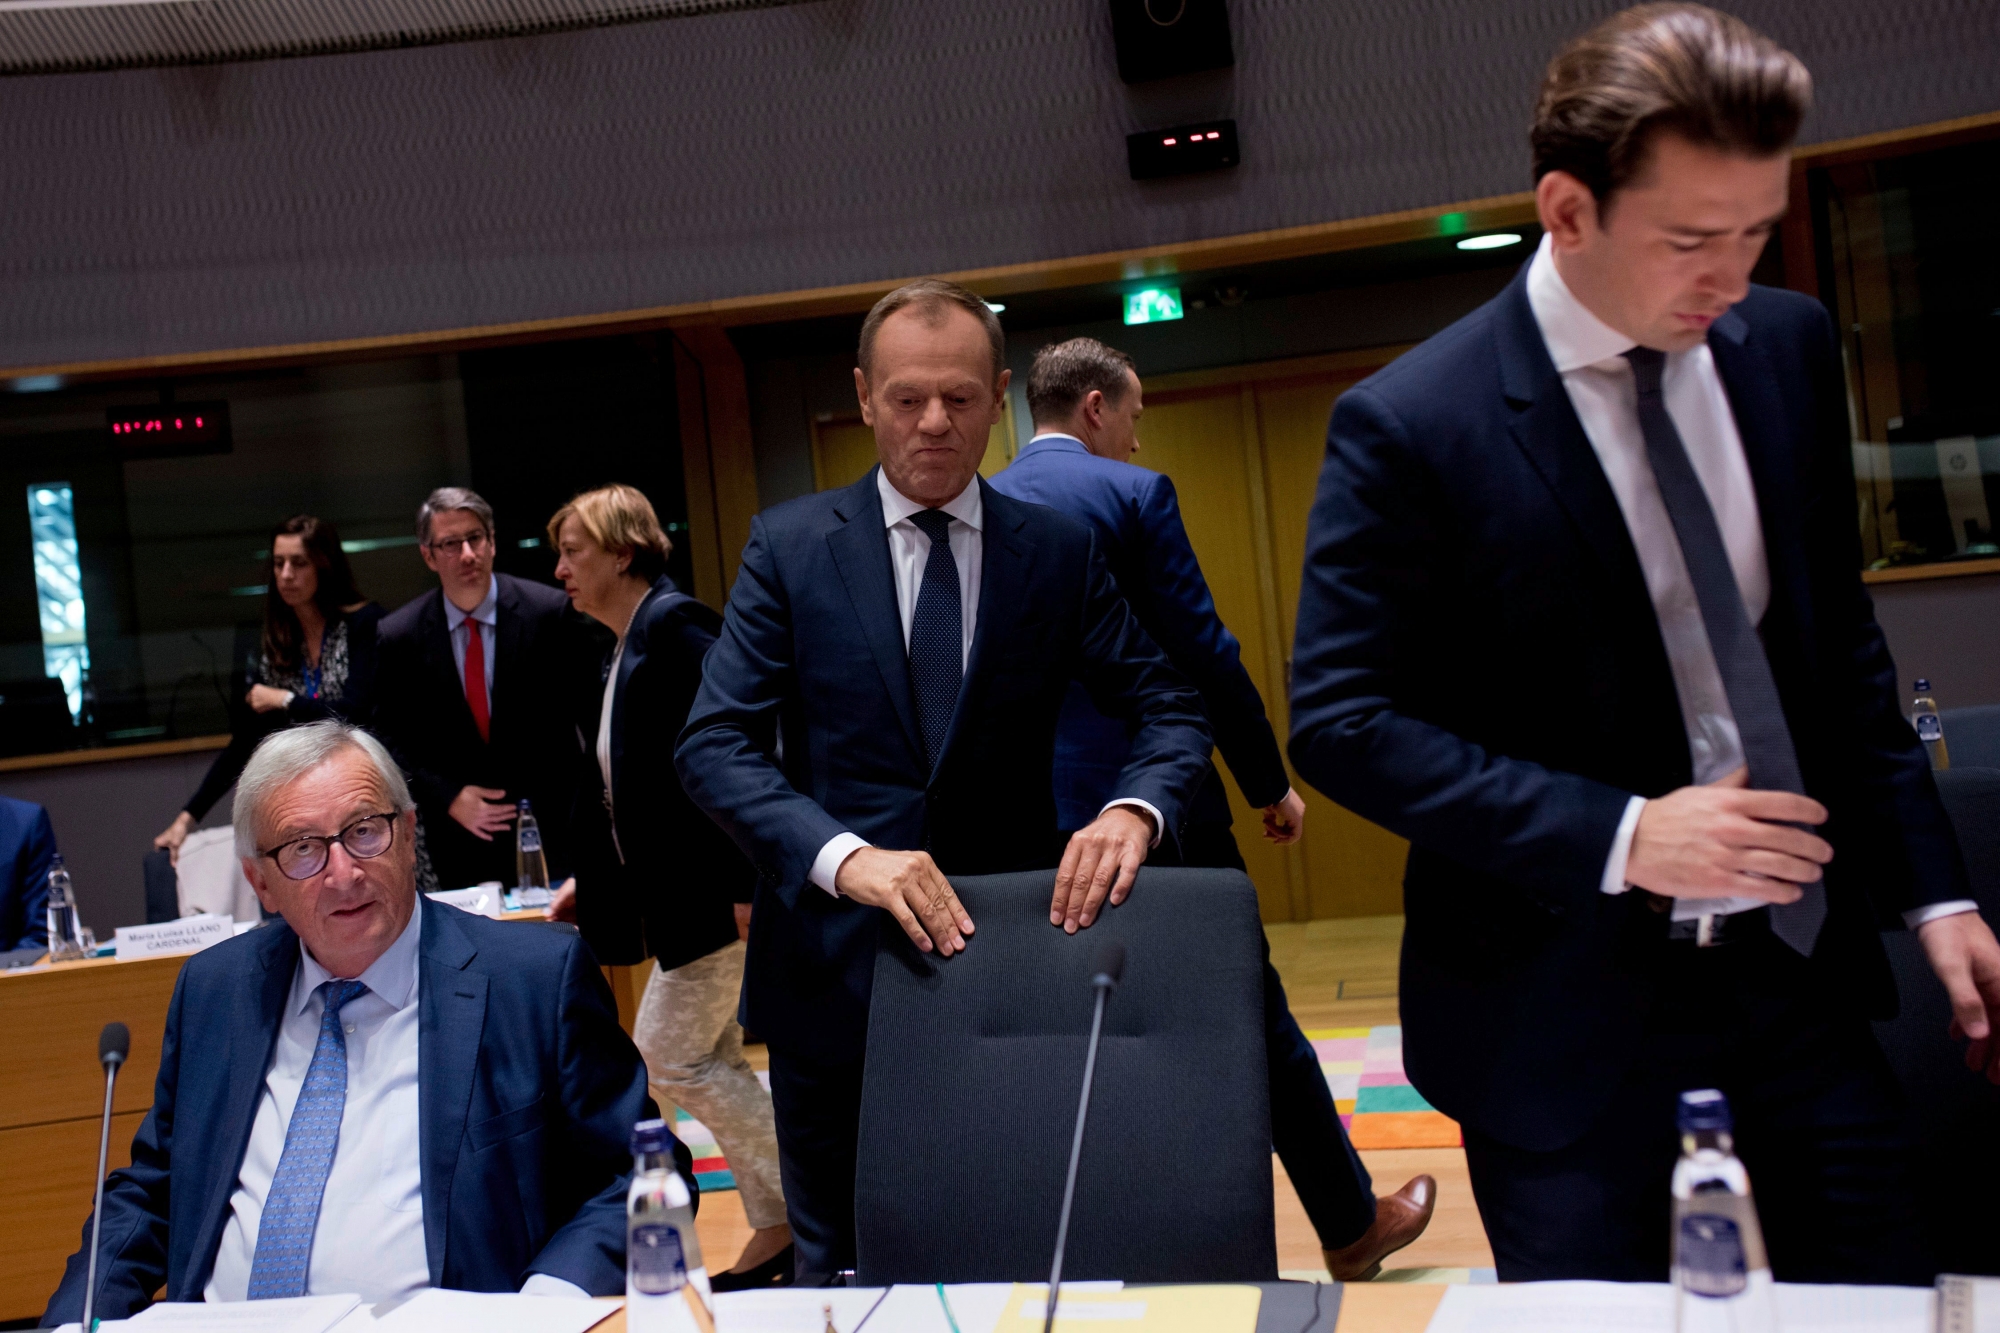 European Commission President Jean-Claude Juncker, European Council President Donald Tusk and Austria's Chancellor Sebastian Kurz, from left, arrive to a Tripartite Social Summit roundtable at the European Council headquarters in Brussels, Tuesday, Oct. 16, 2018. (AP Photo/Francisco Seco) Belgium Brexit